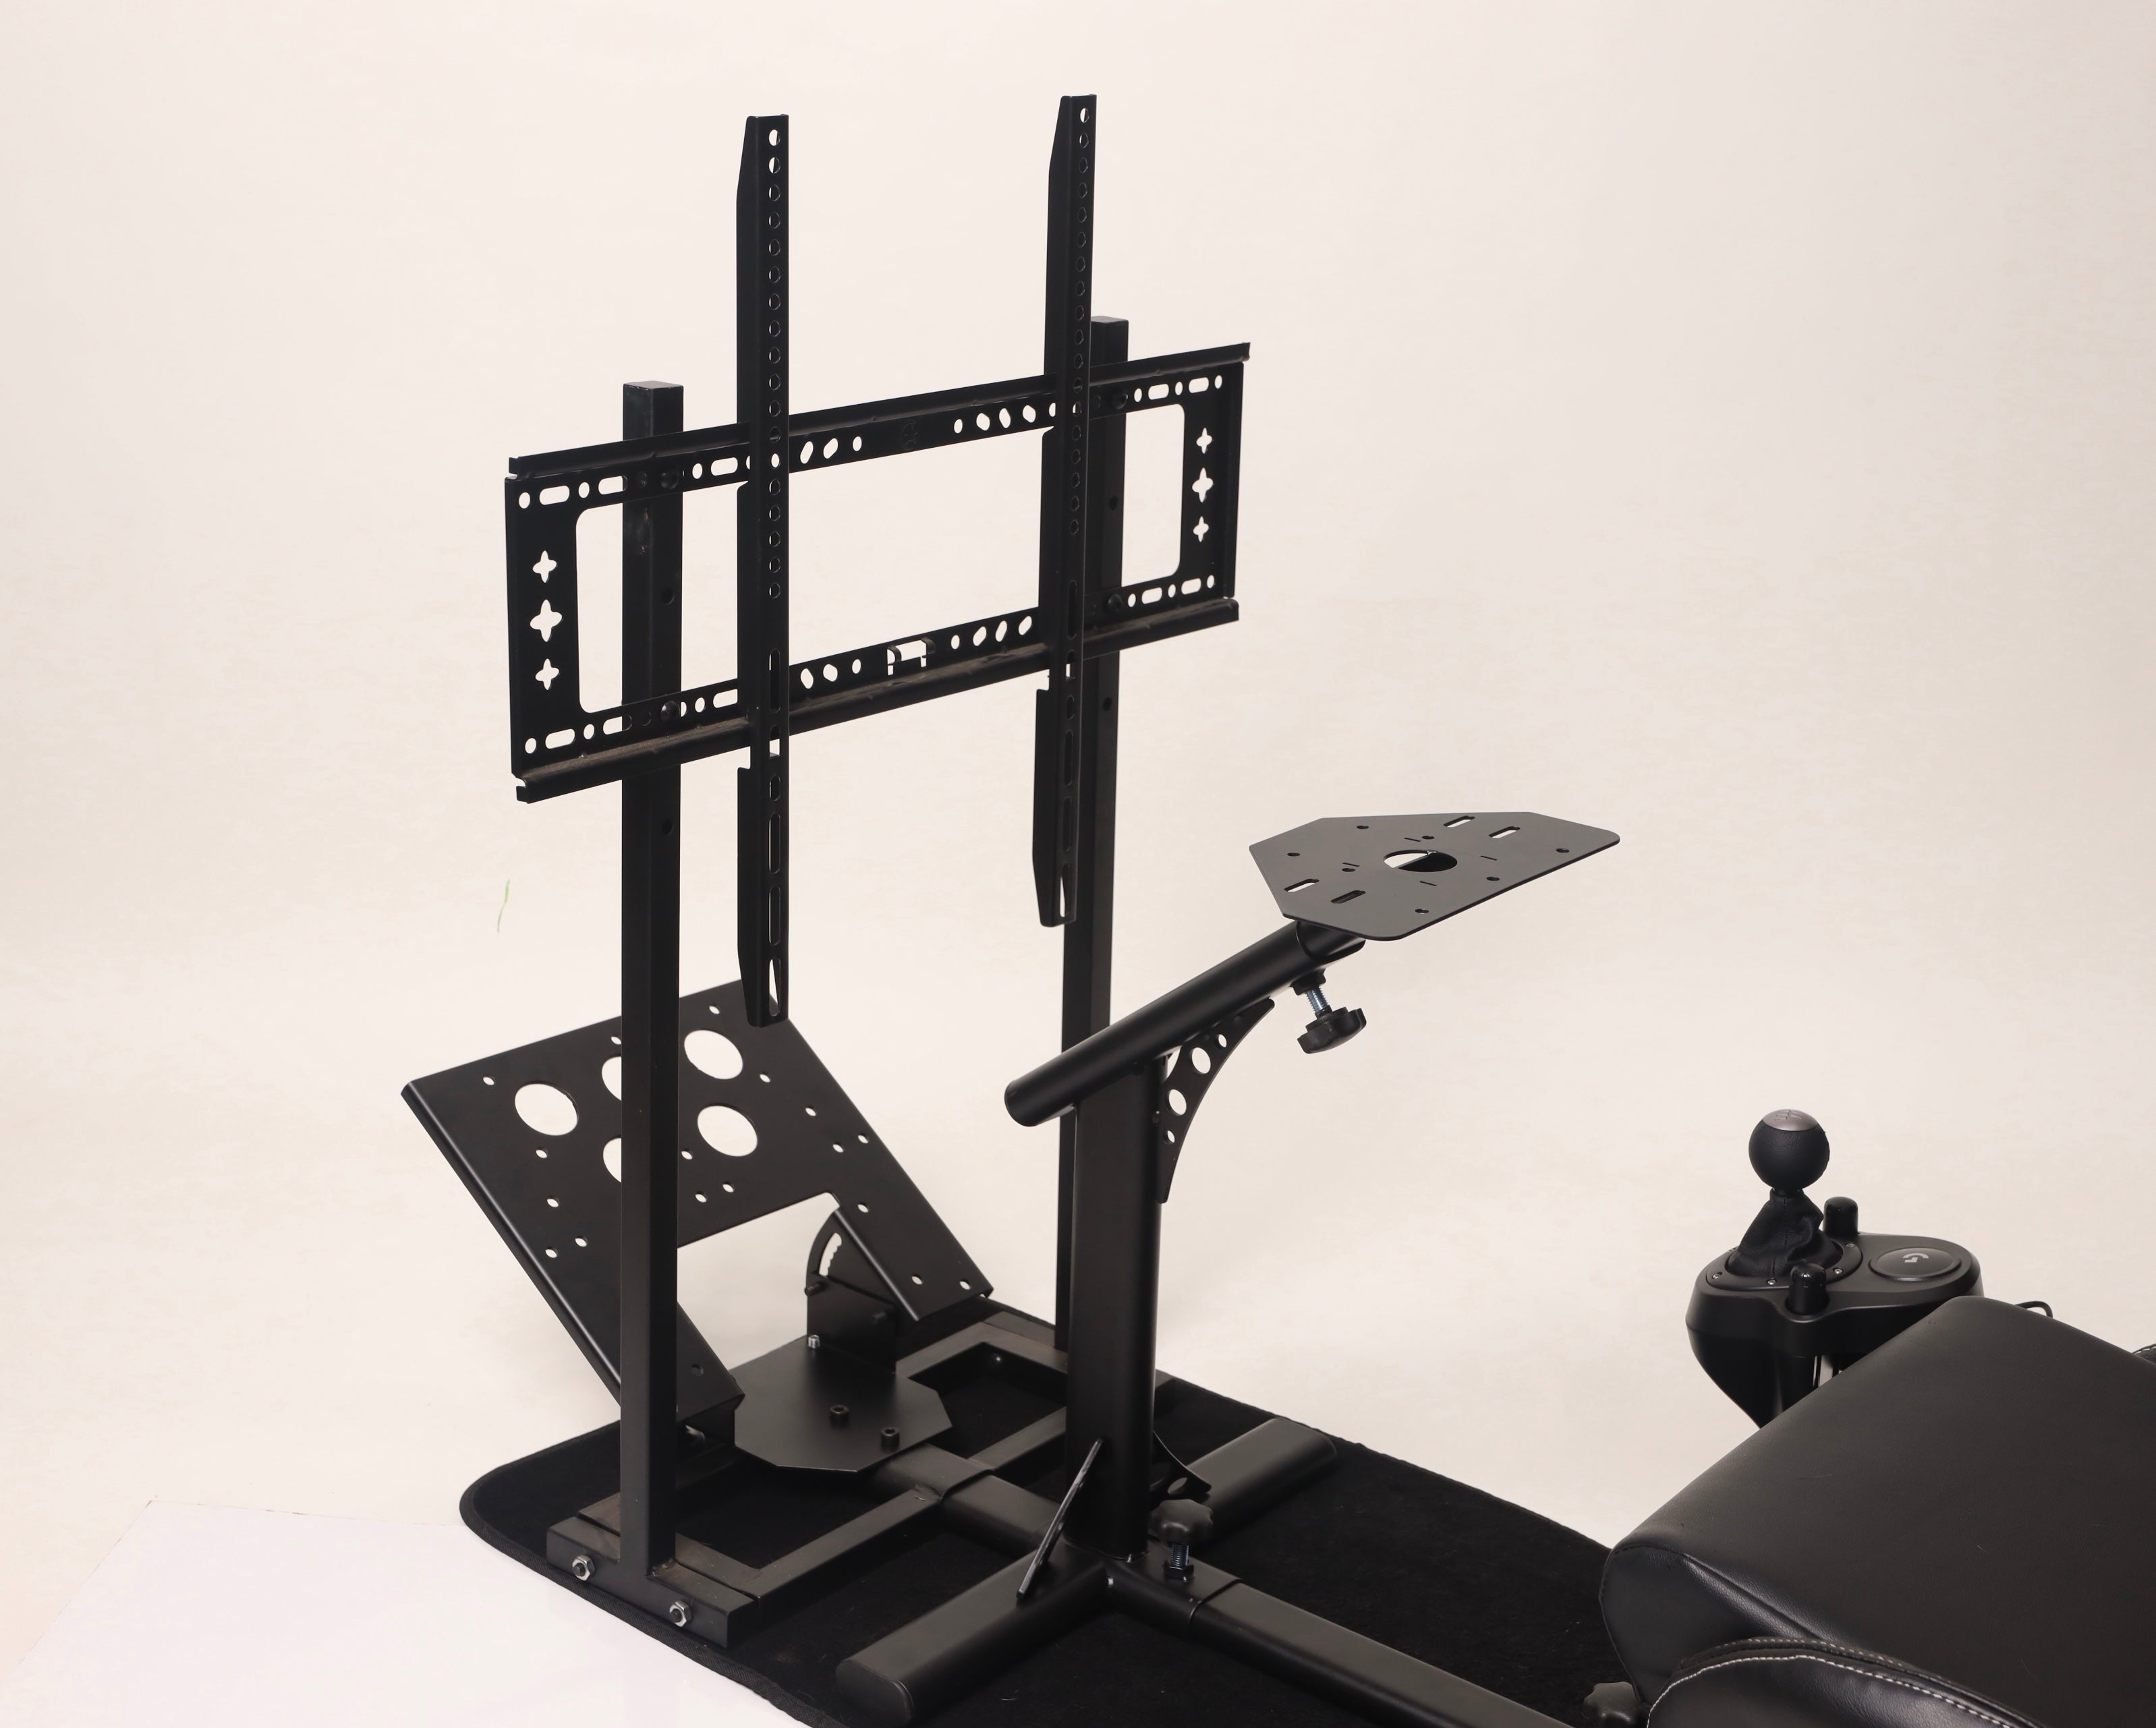 TV Monitor Stand for Racing Seat Gaming Chair Simulator